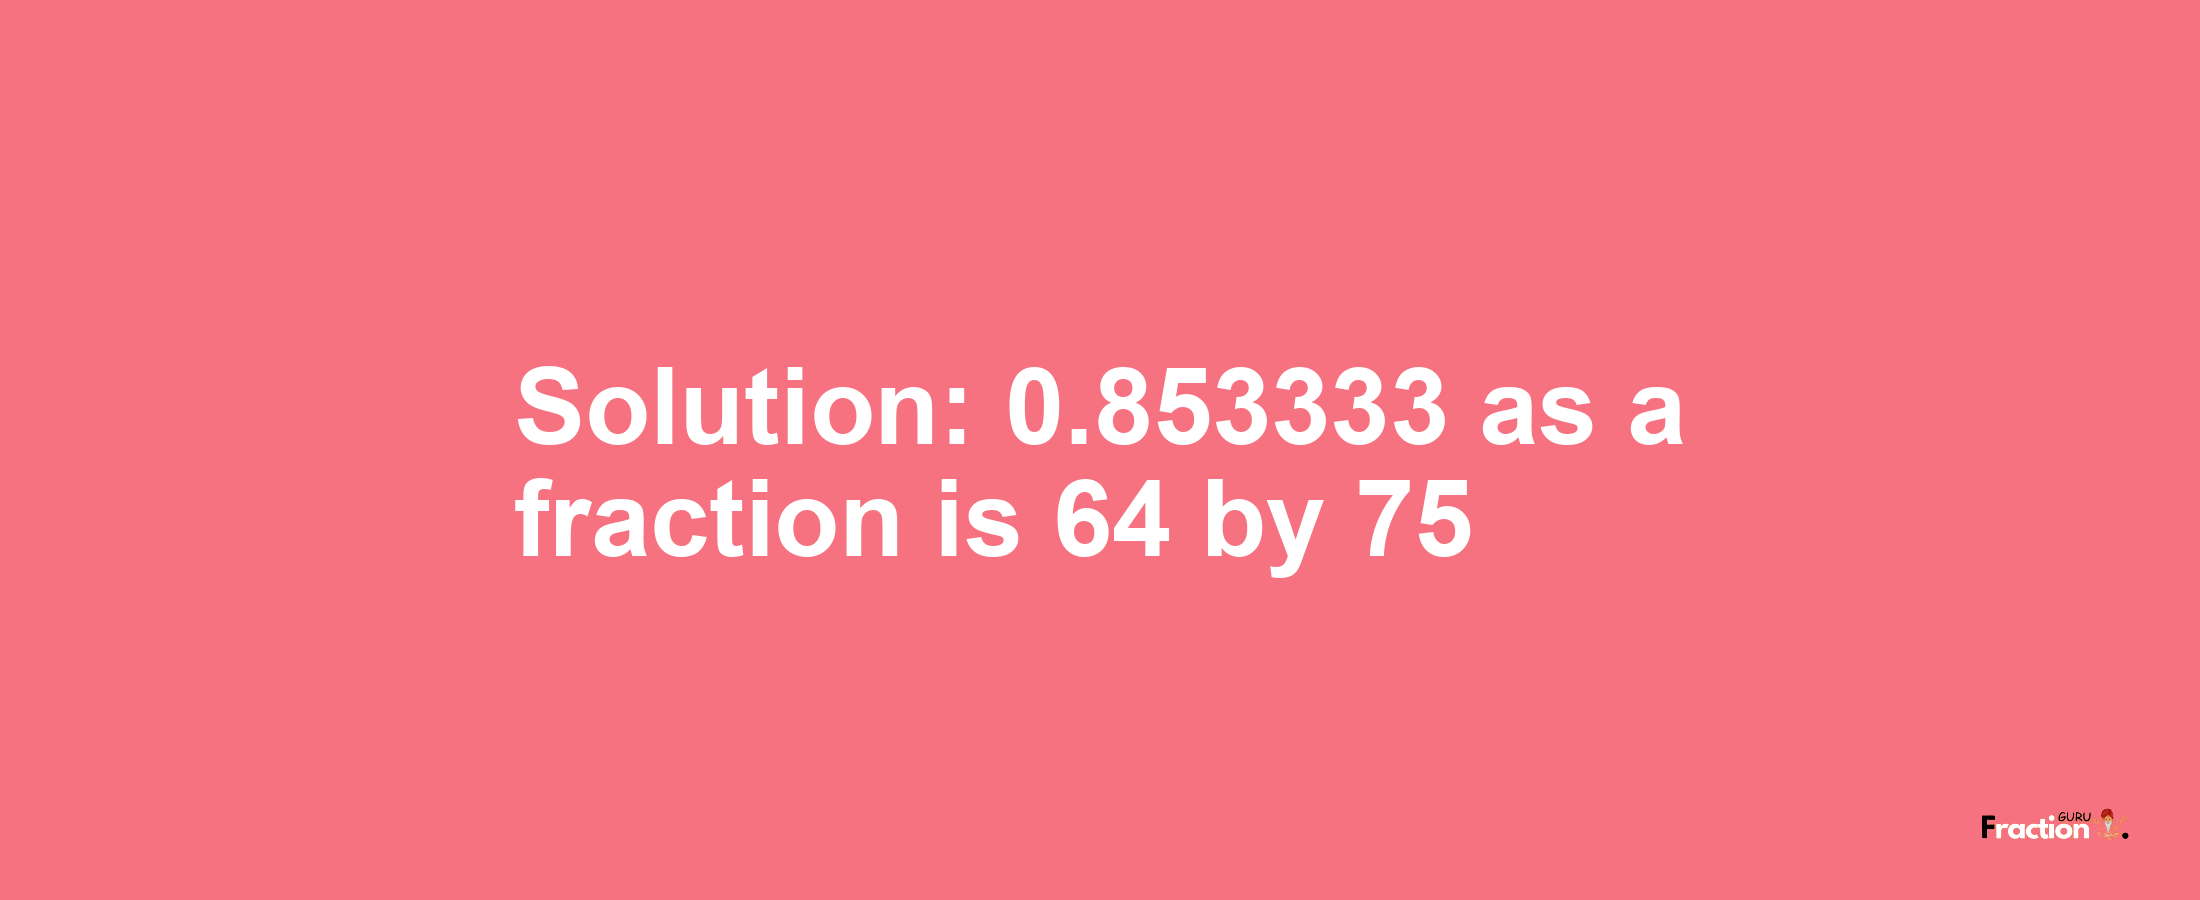 Solution:0.853333 as a fraction is 64/75